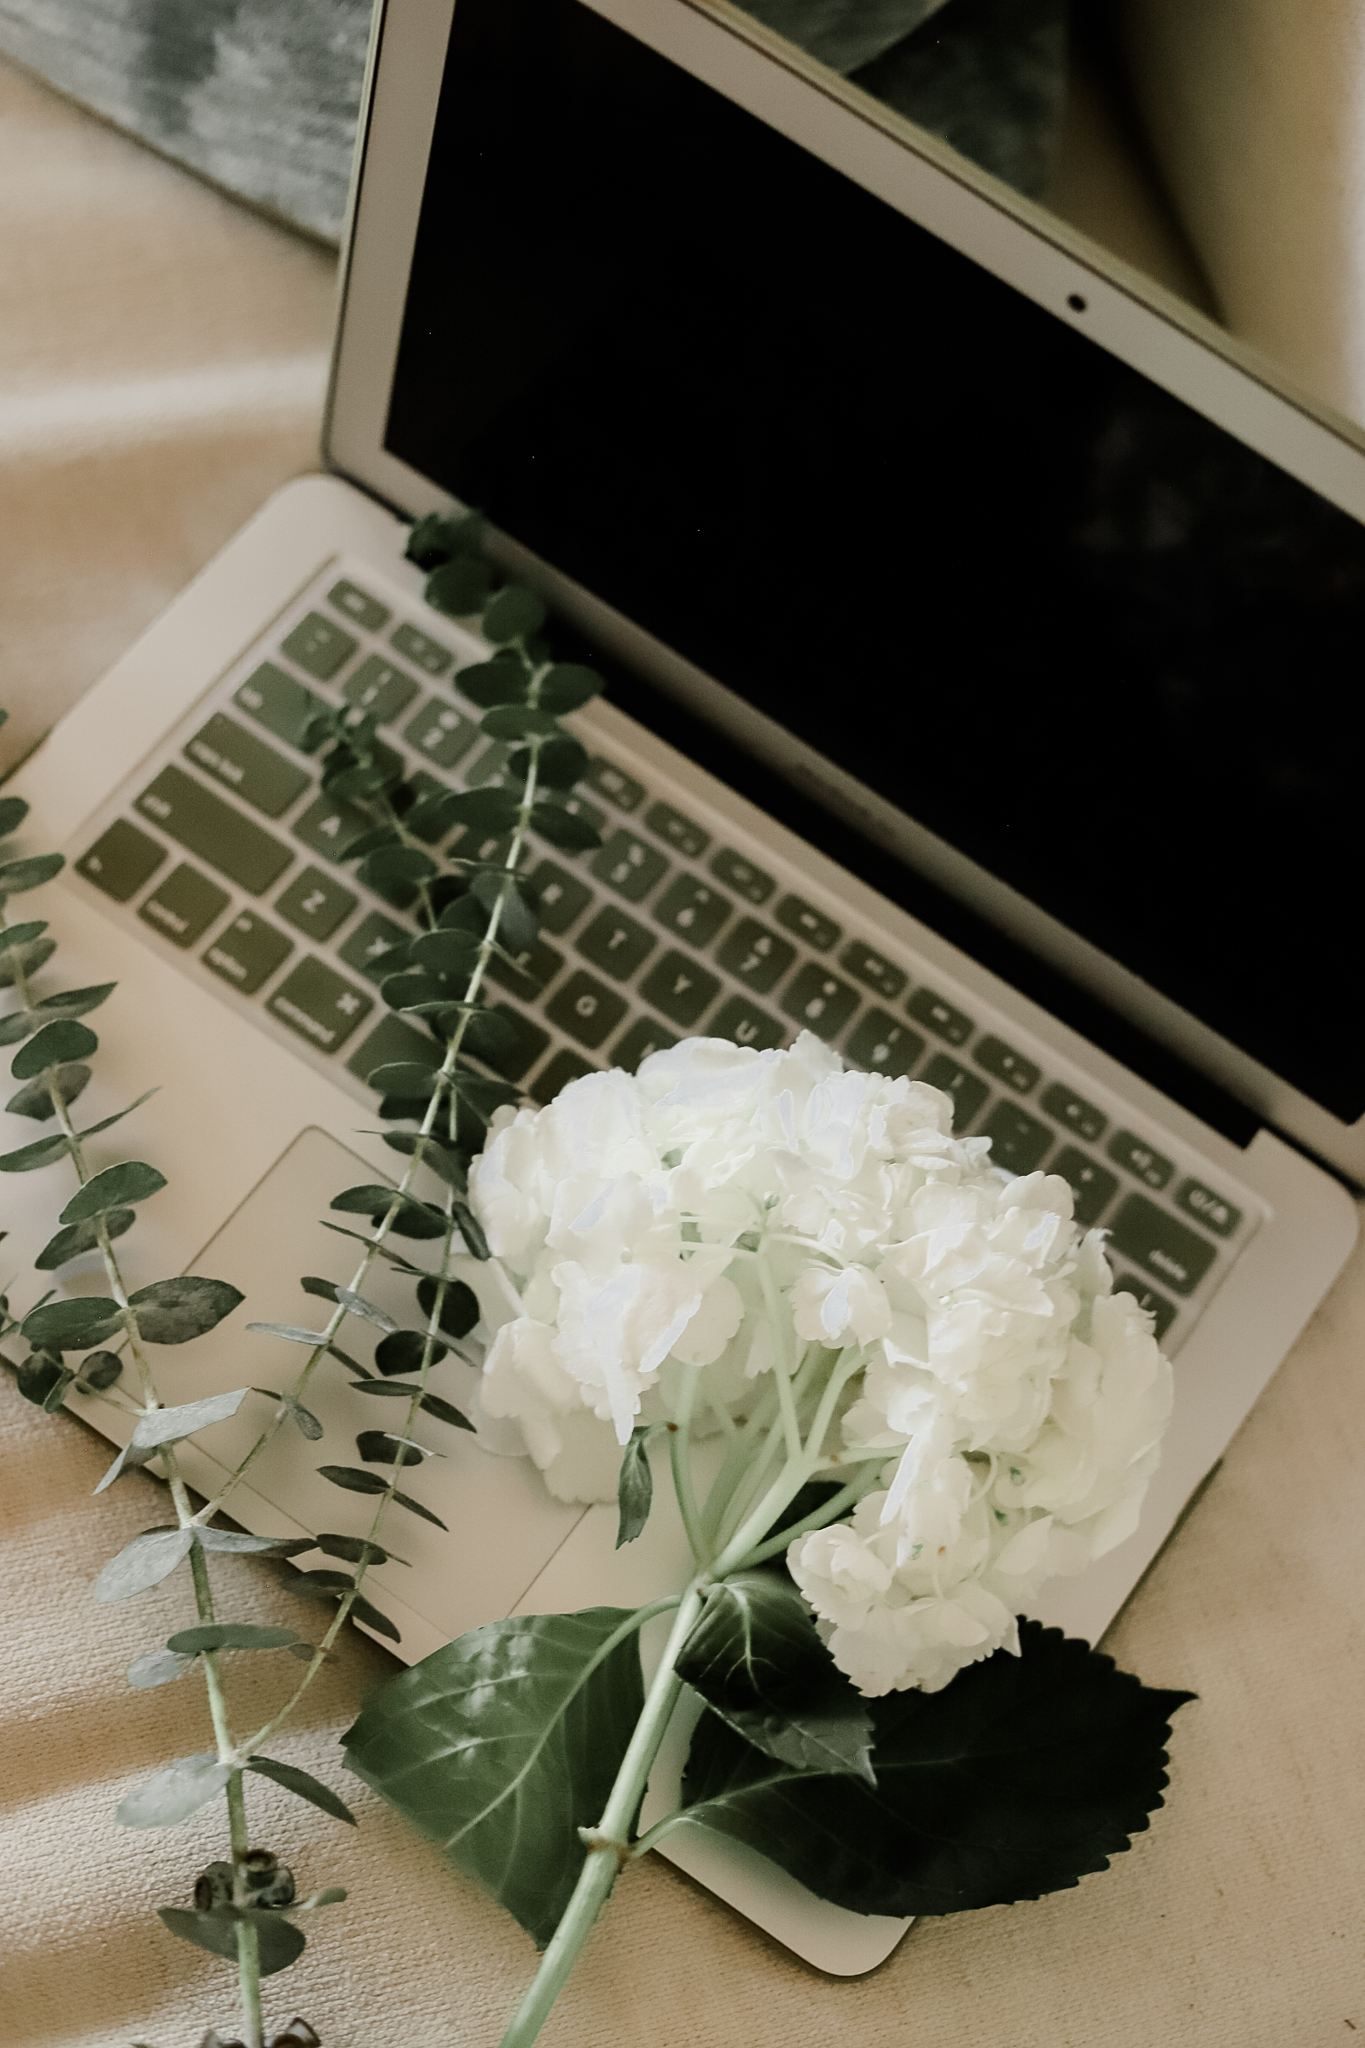 computer with white flower laying on it